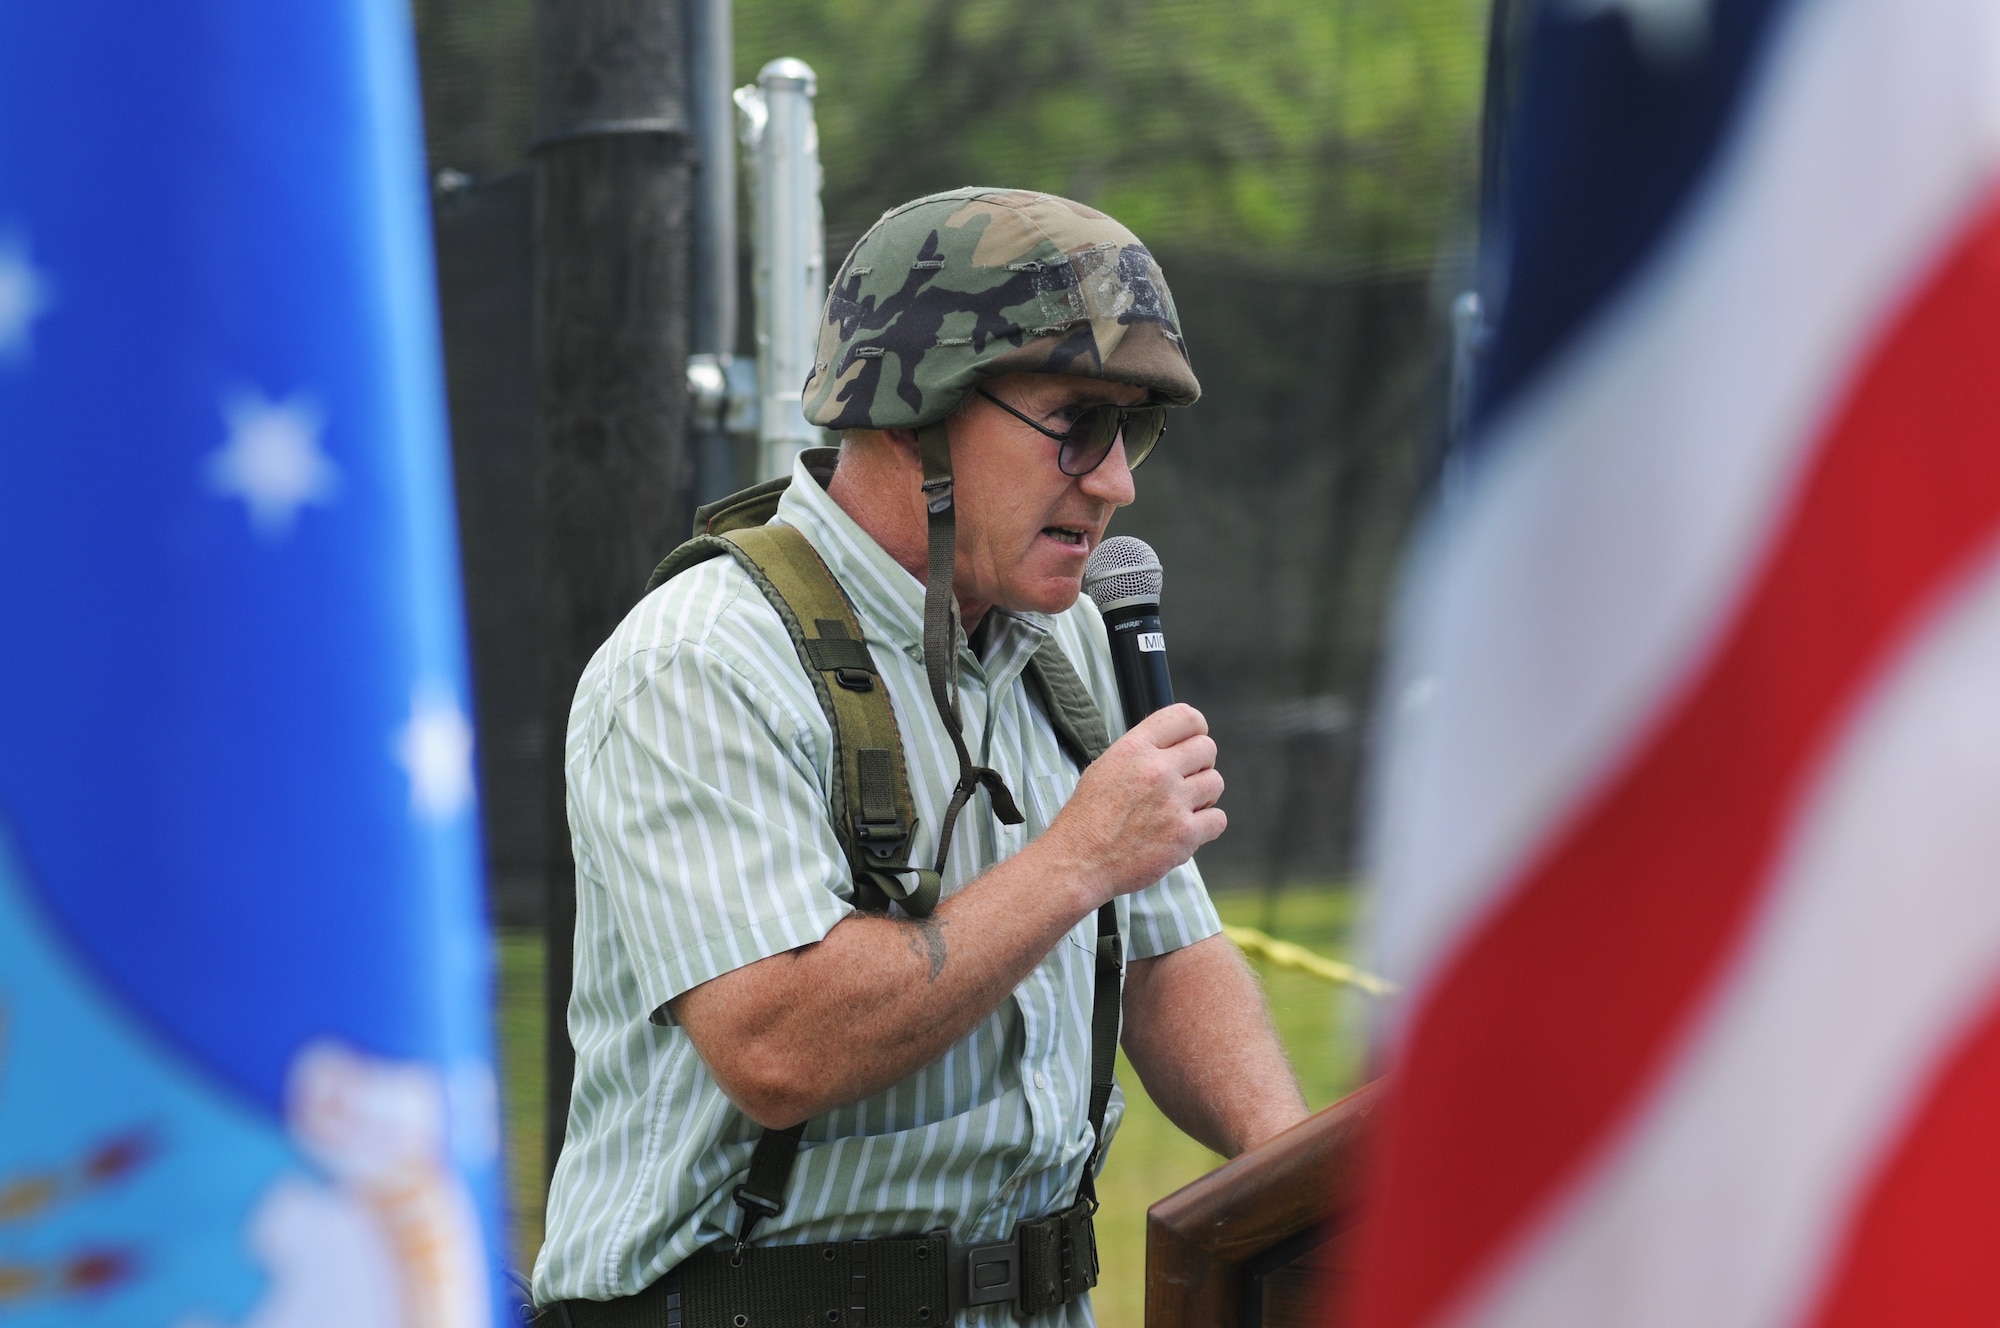 Tom Golden, 81st Force Support Squadron, serves as master of ceremonies, while dressed in combat gear, during the paintball facility grand opening April 25, 2014, southeast of the commissary at Keesler Air Force Base, Miss.  The paintball facility was funded with a portion of the 2013 Commander-in-Chief Installation Excellence award funds.  (U.S. Air Force photo by Kemberly Groue)